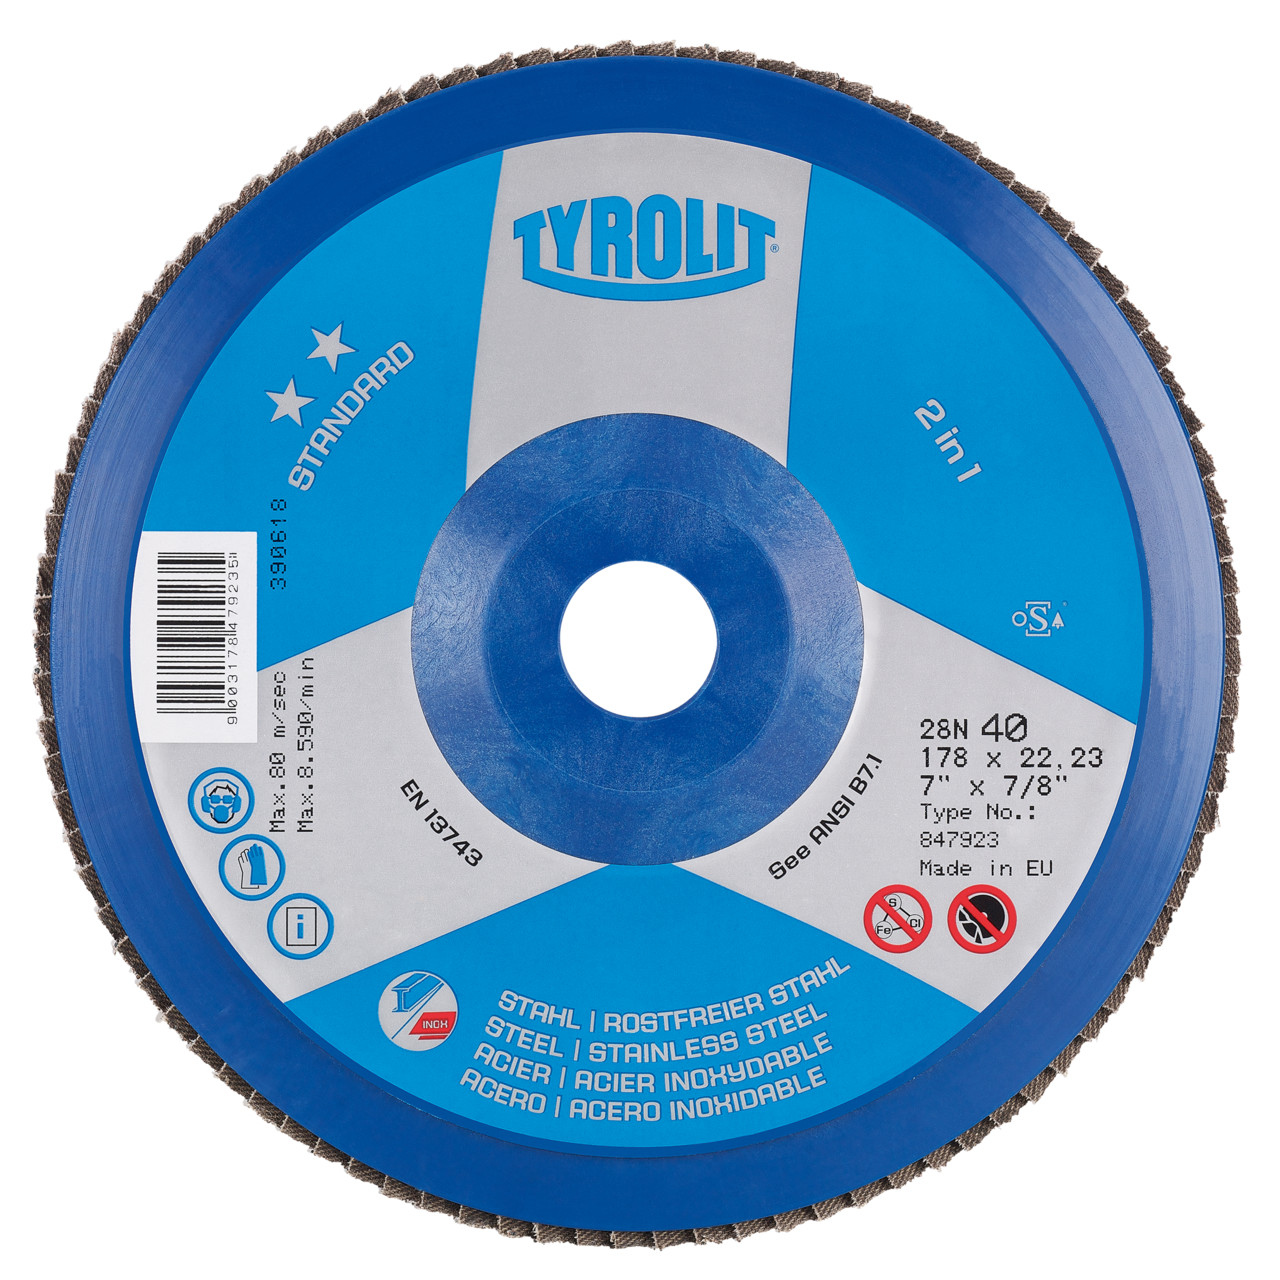 TYROLIT serrated lock washer DxH 125x22.2 2in1 for steel and stainless steel, P40, shape: 28N - straight version (plastic carrier body), Art. 847921